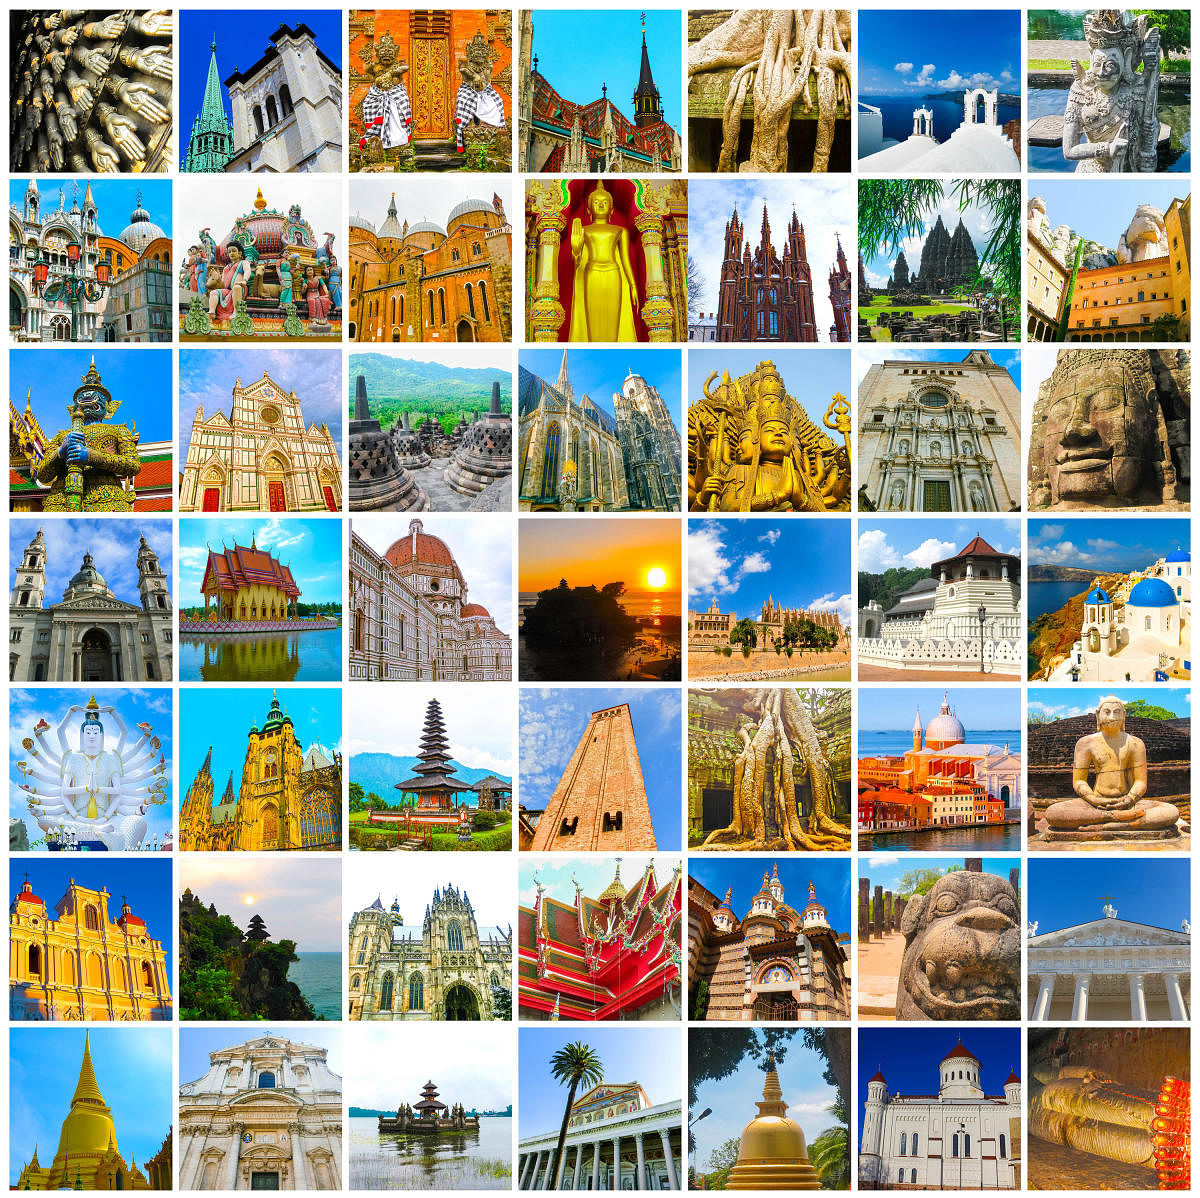 World Religious Monuments - collage from different religions from Bali, Thailand, Cambodia at Asia and Florens, Spain, Santorini, Venice in EuropeWorld Monuments Collage